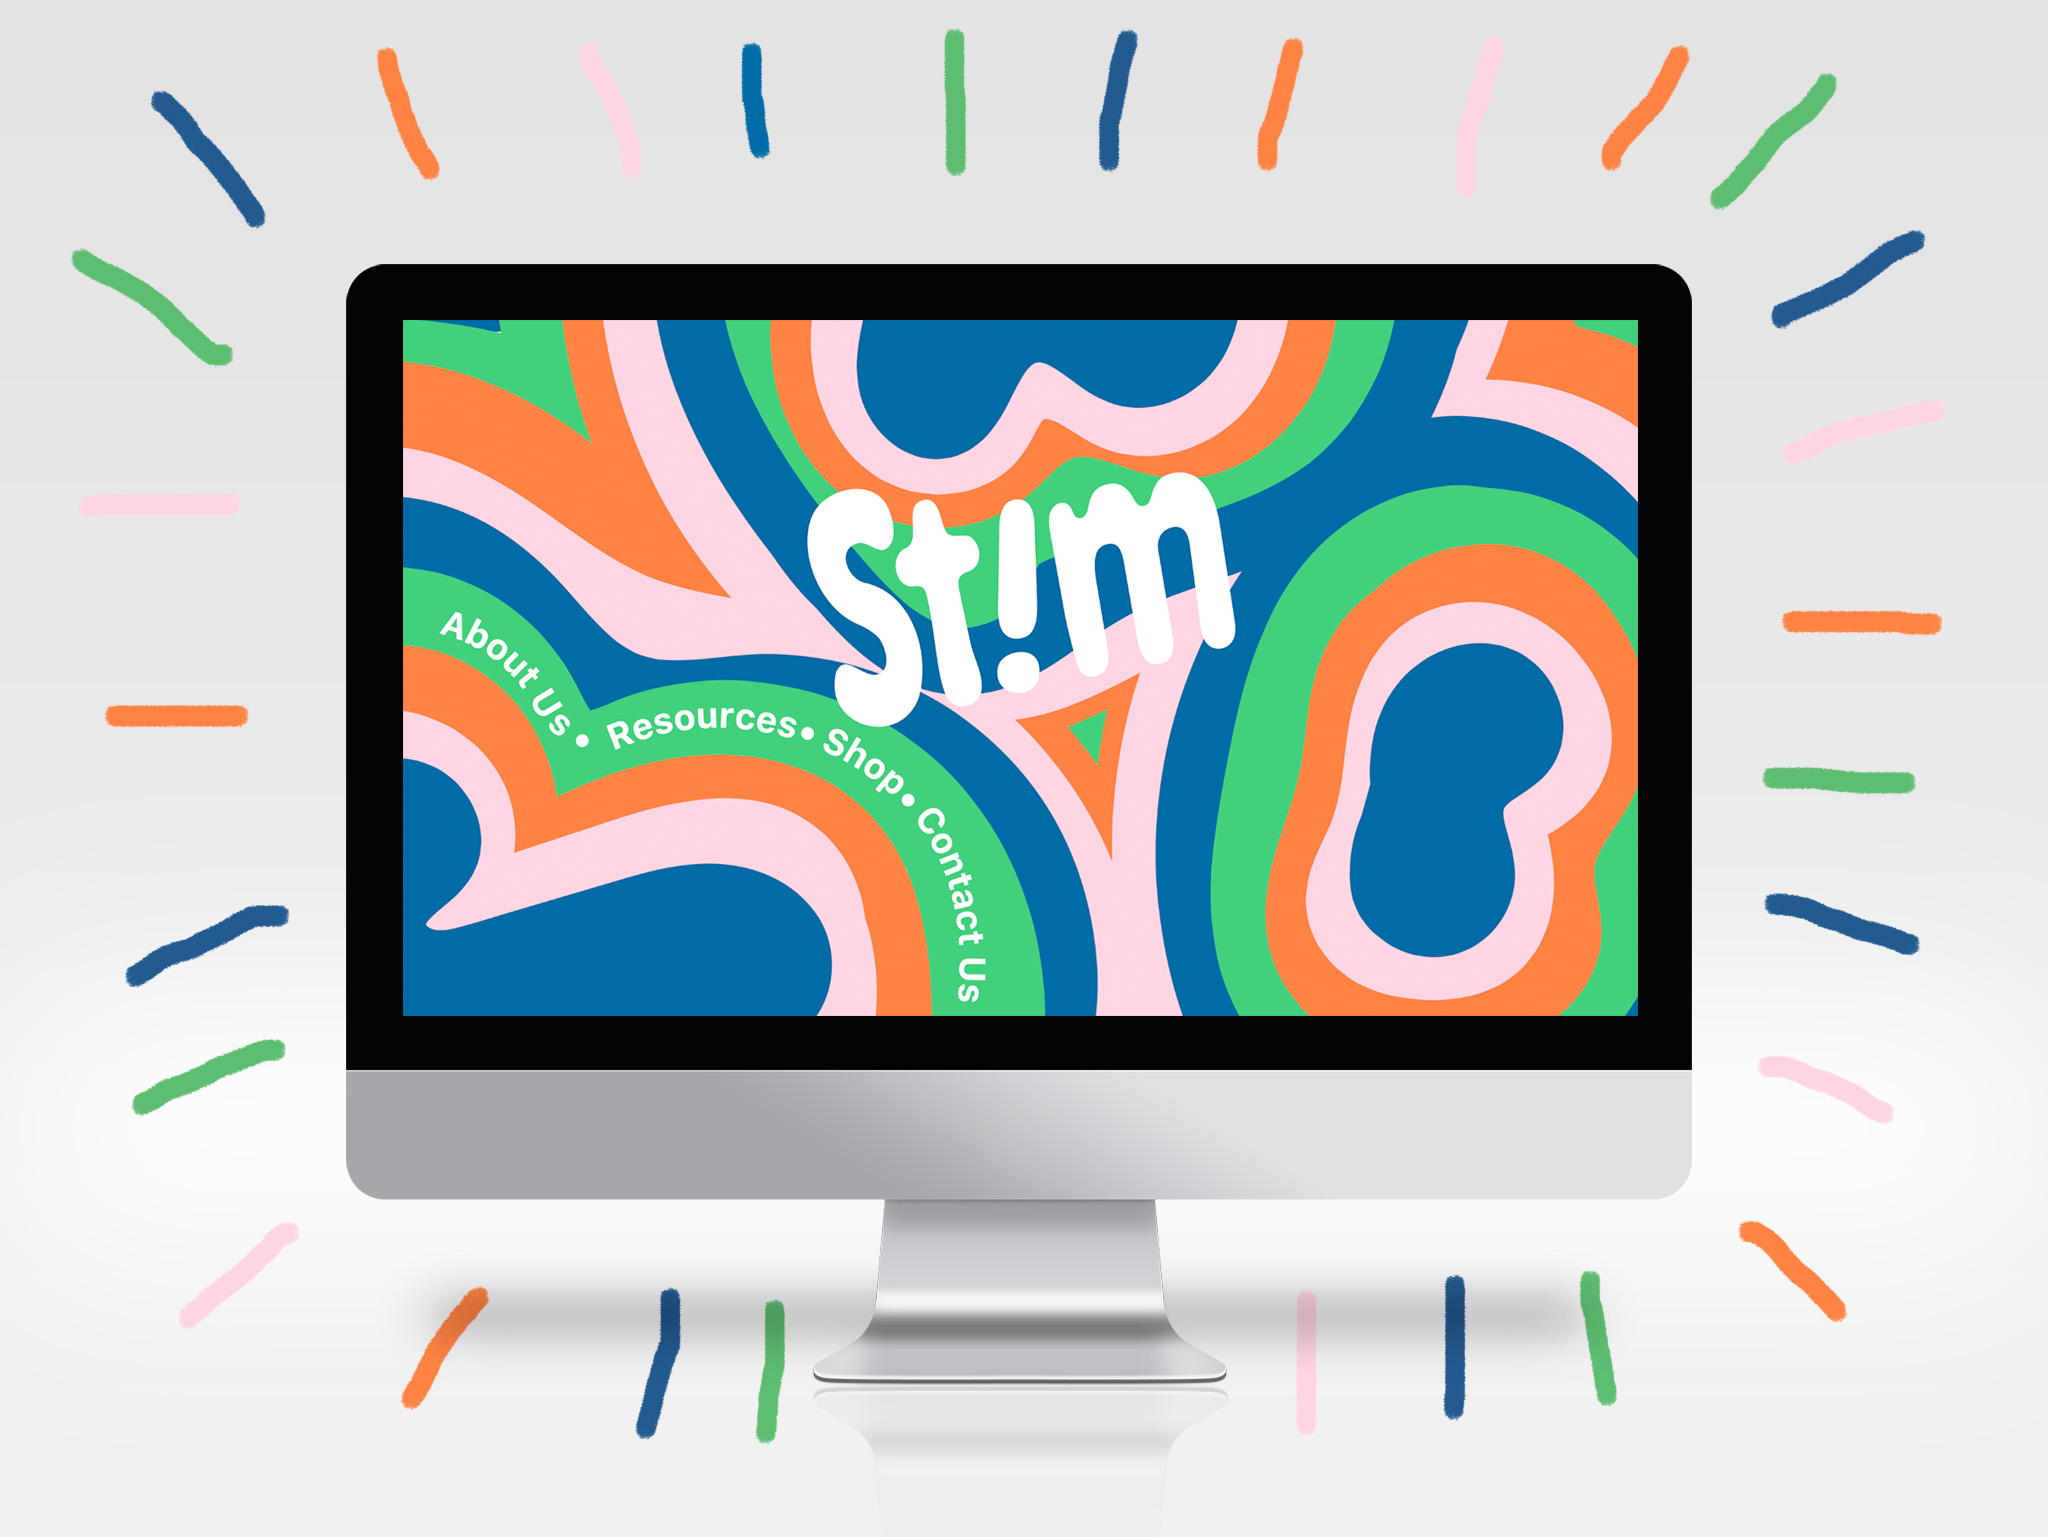 Mockup of Stim website homepage on large Imac screen with illustrated lines in the background.